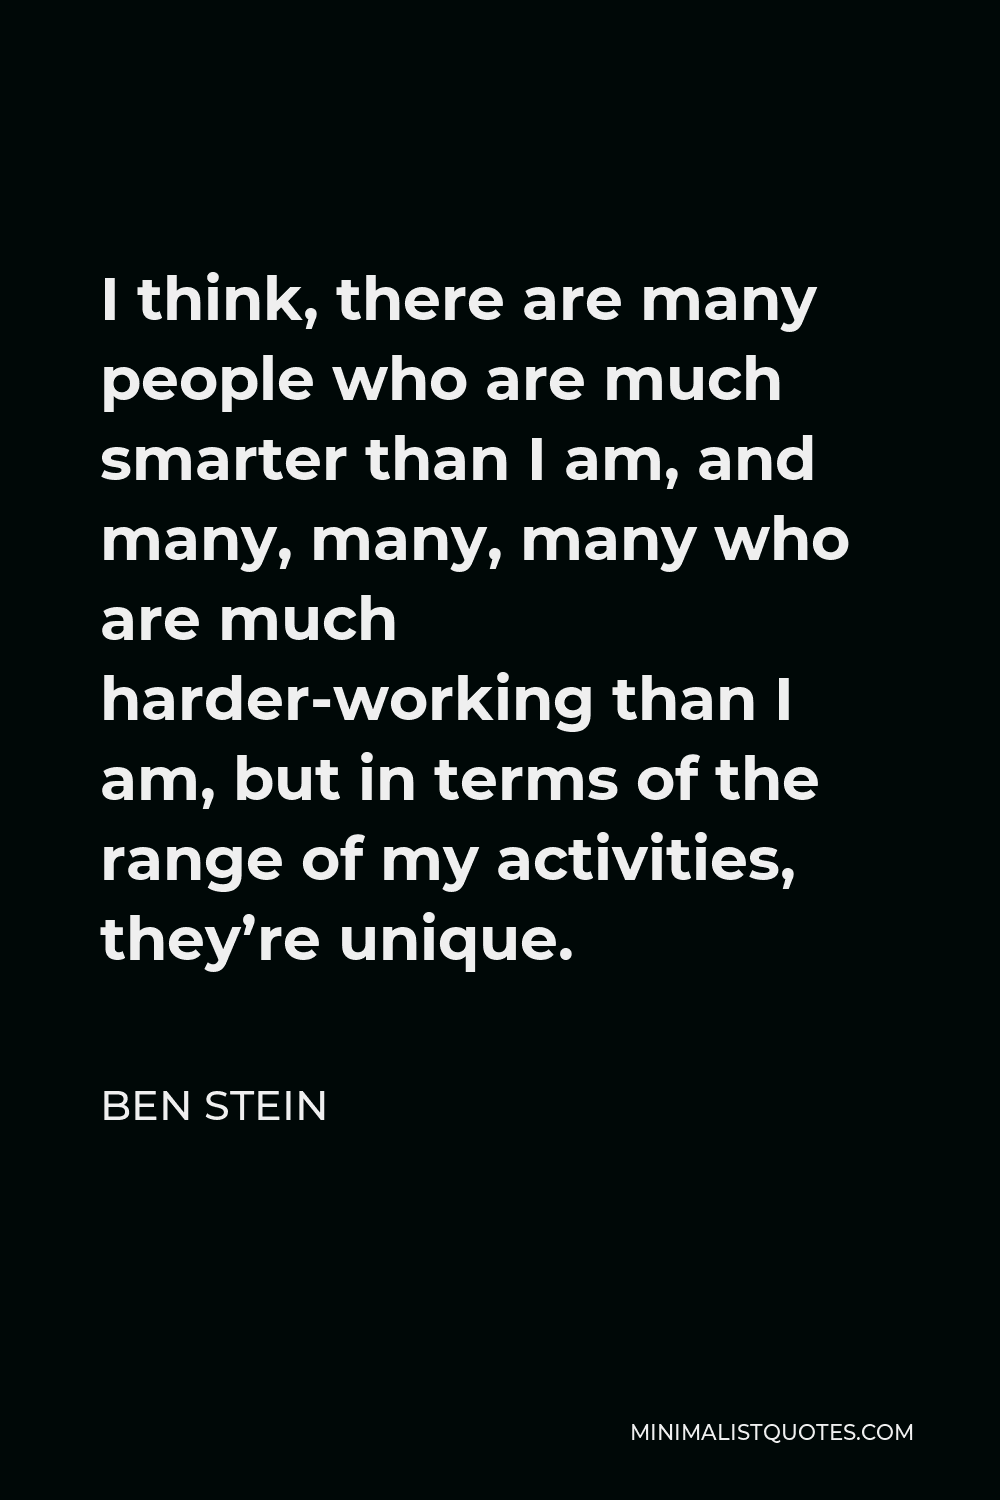 Ben Stein Quote I think, there are many people who are much smarter